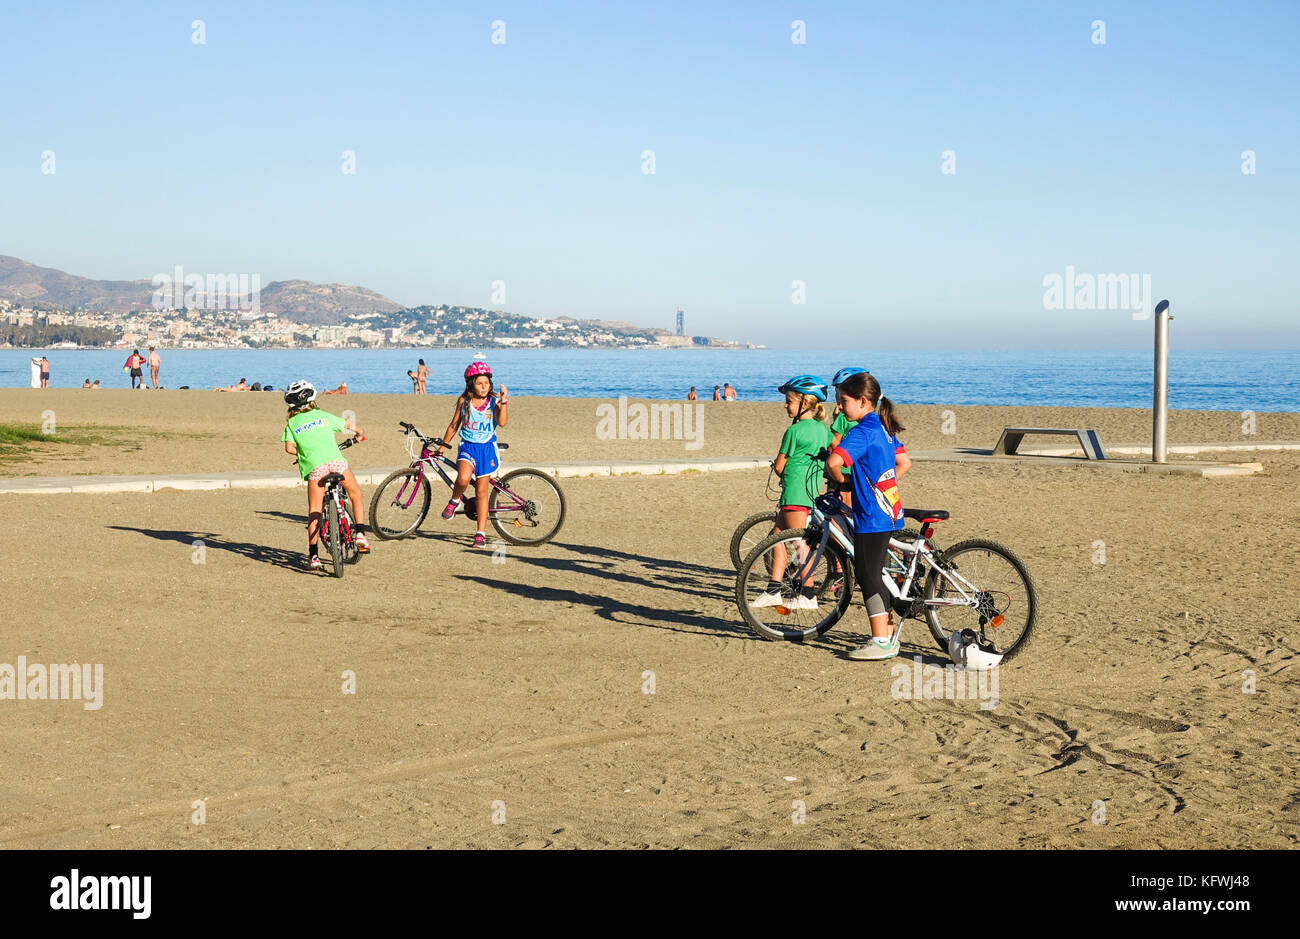 Young kids, sports, cycling on beach, Malaga, Andalusia, Spain. Stock Photo